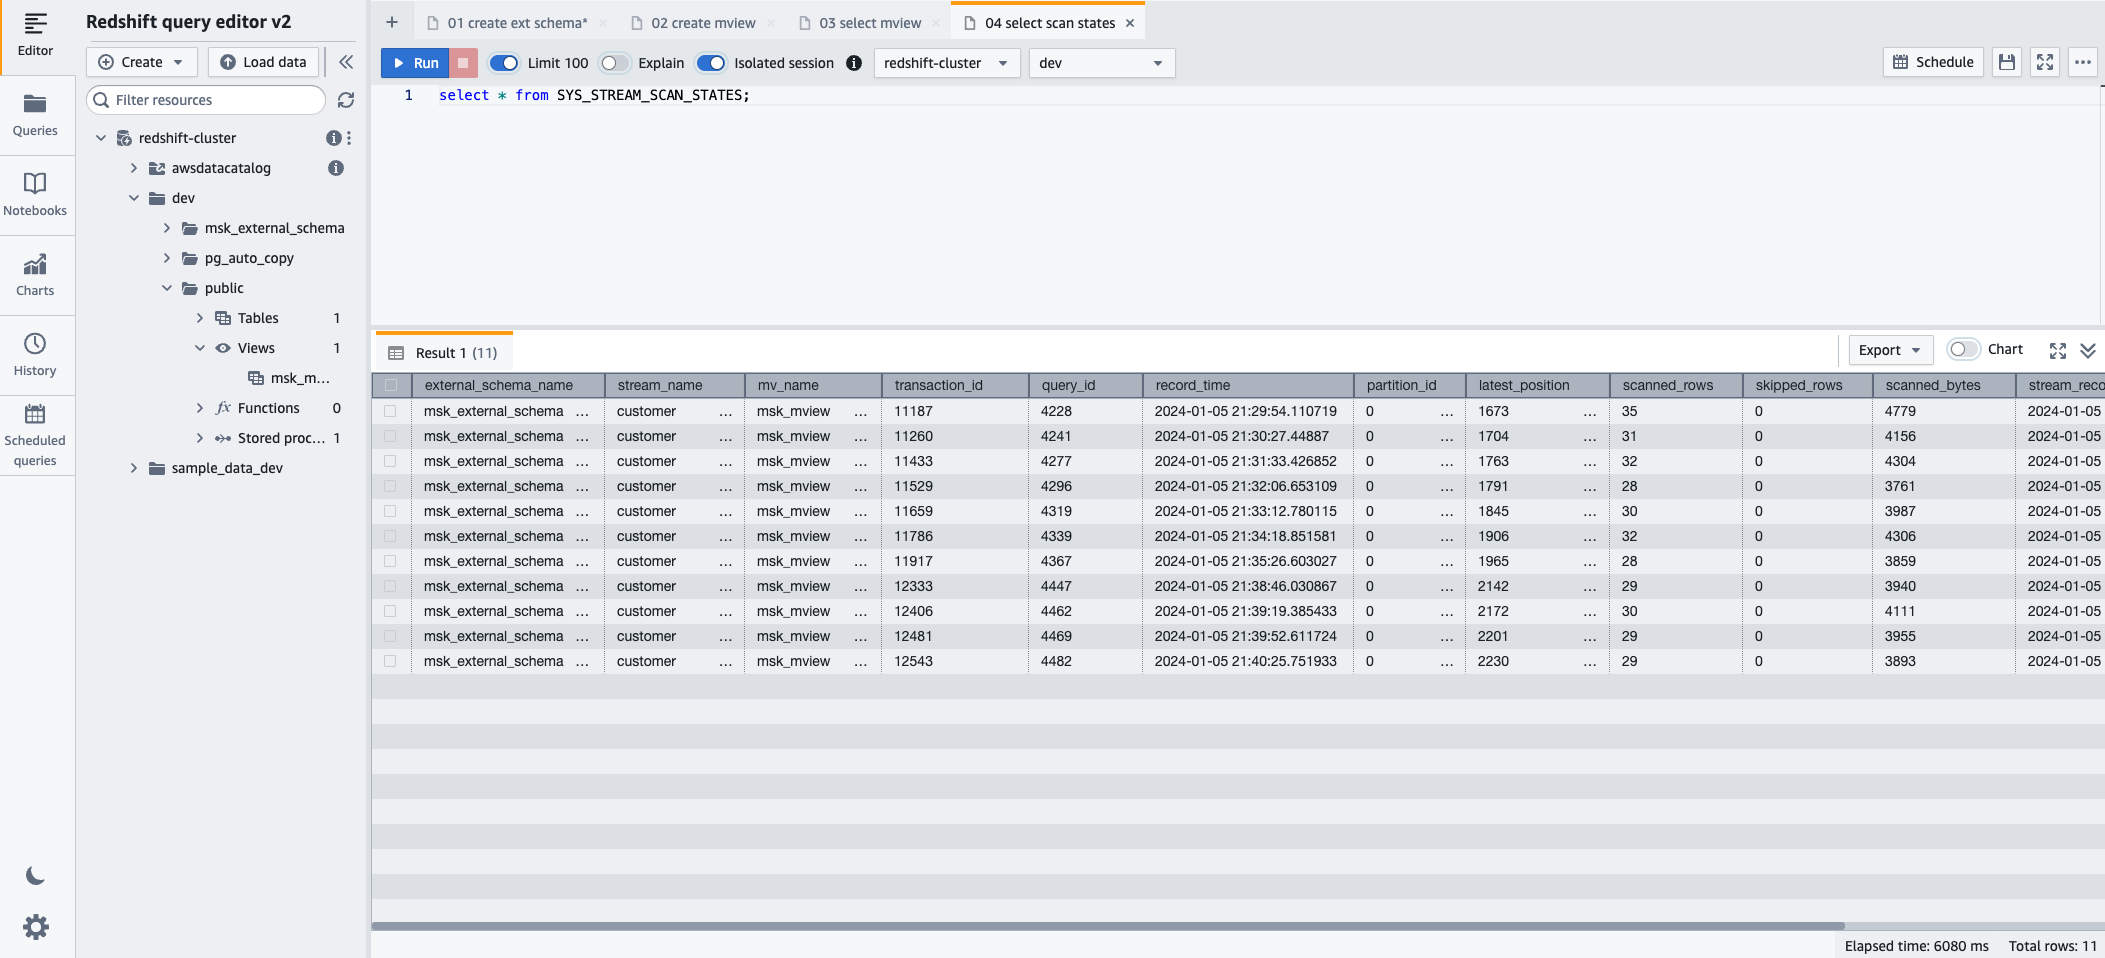 redshift query editor v2 showing the SQL statement used to query the sys stream scan states monitoring view